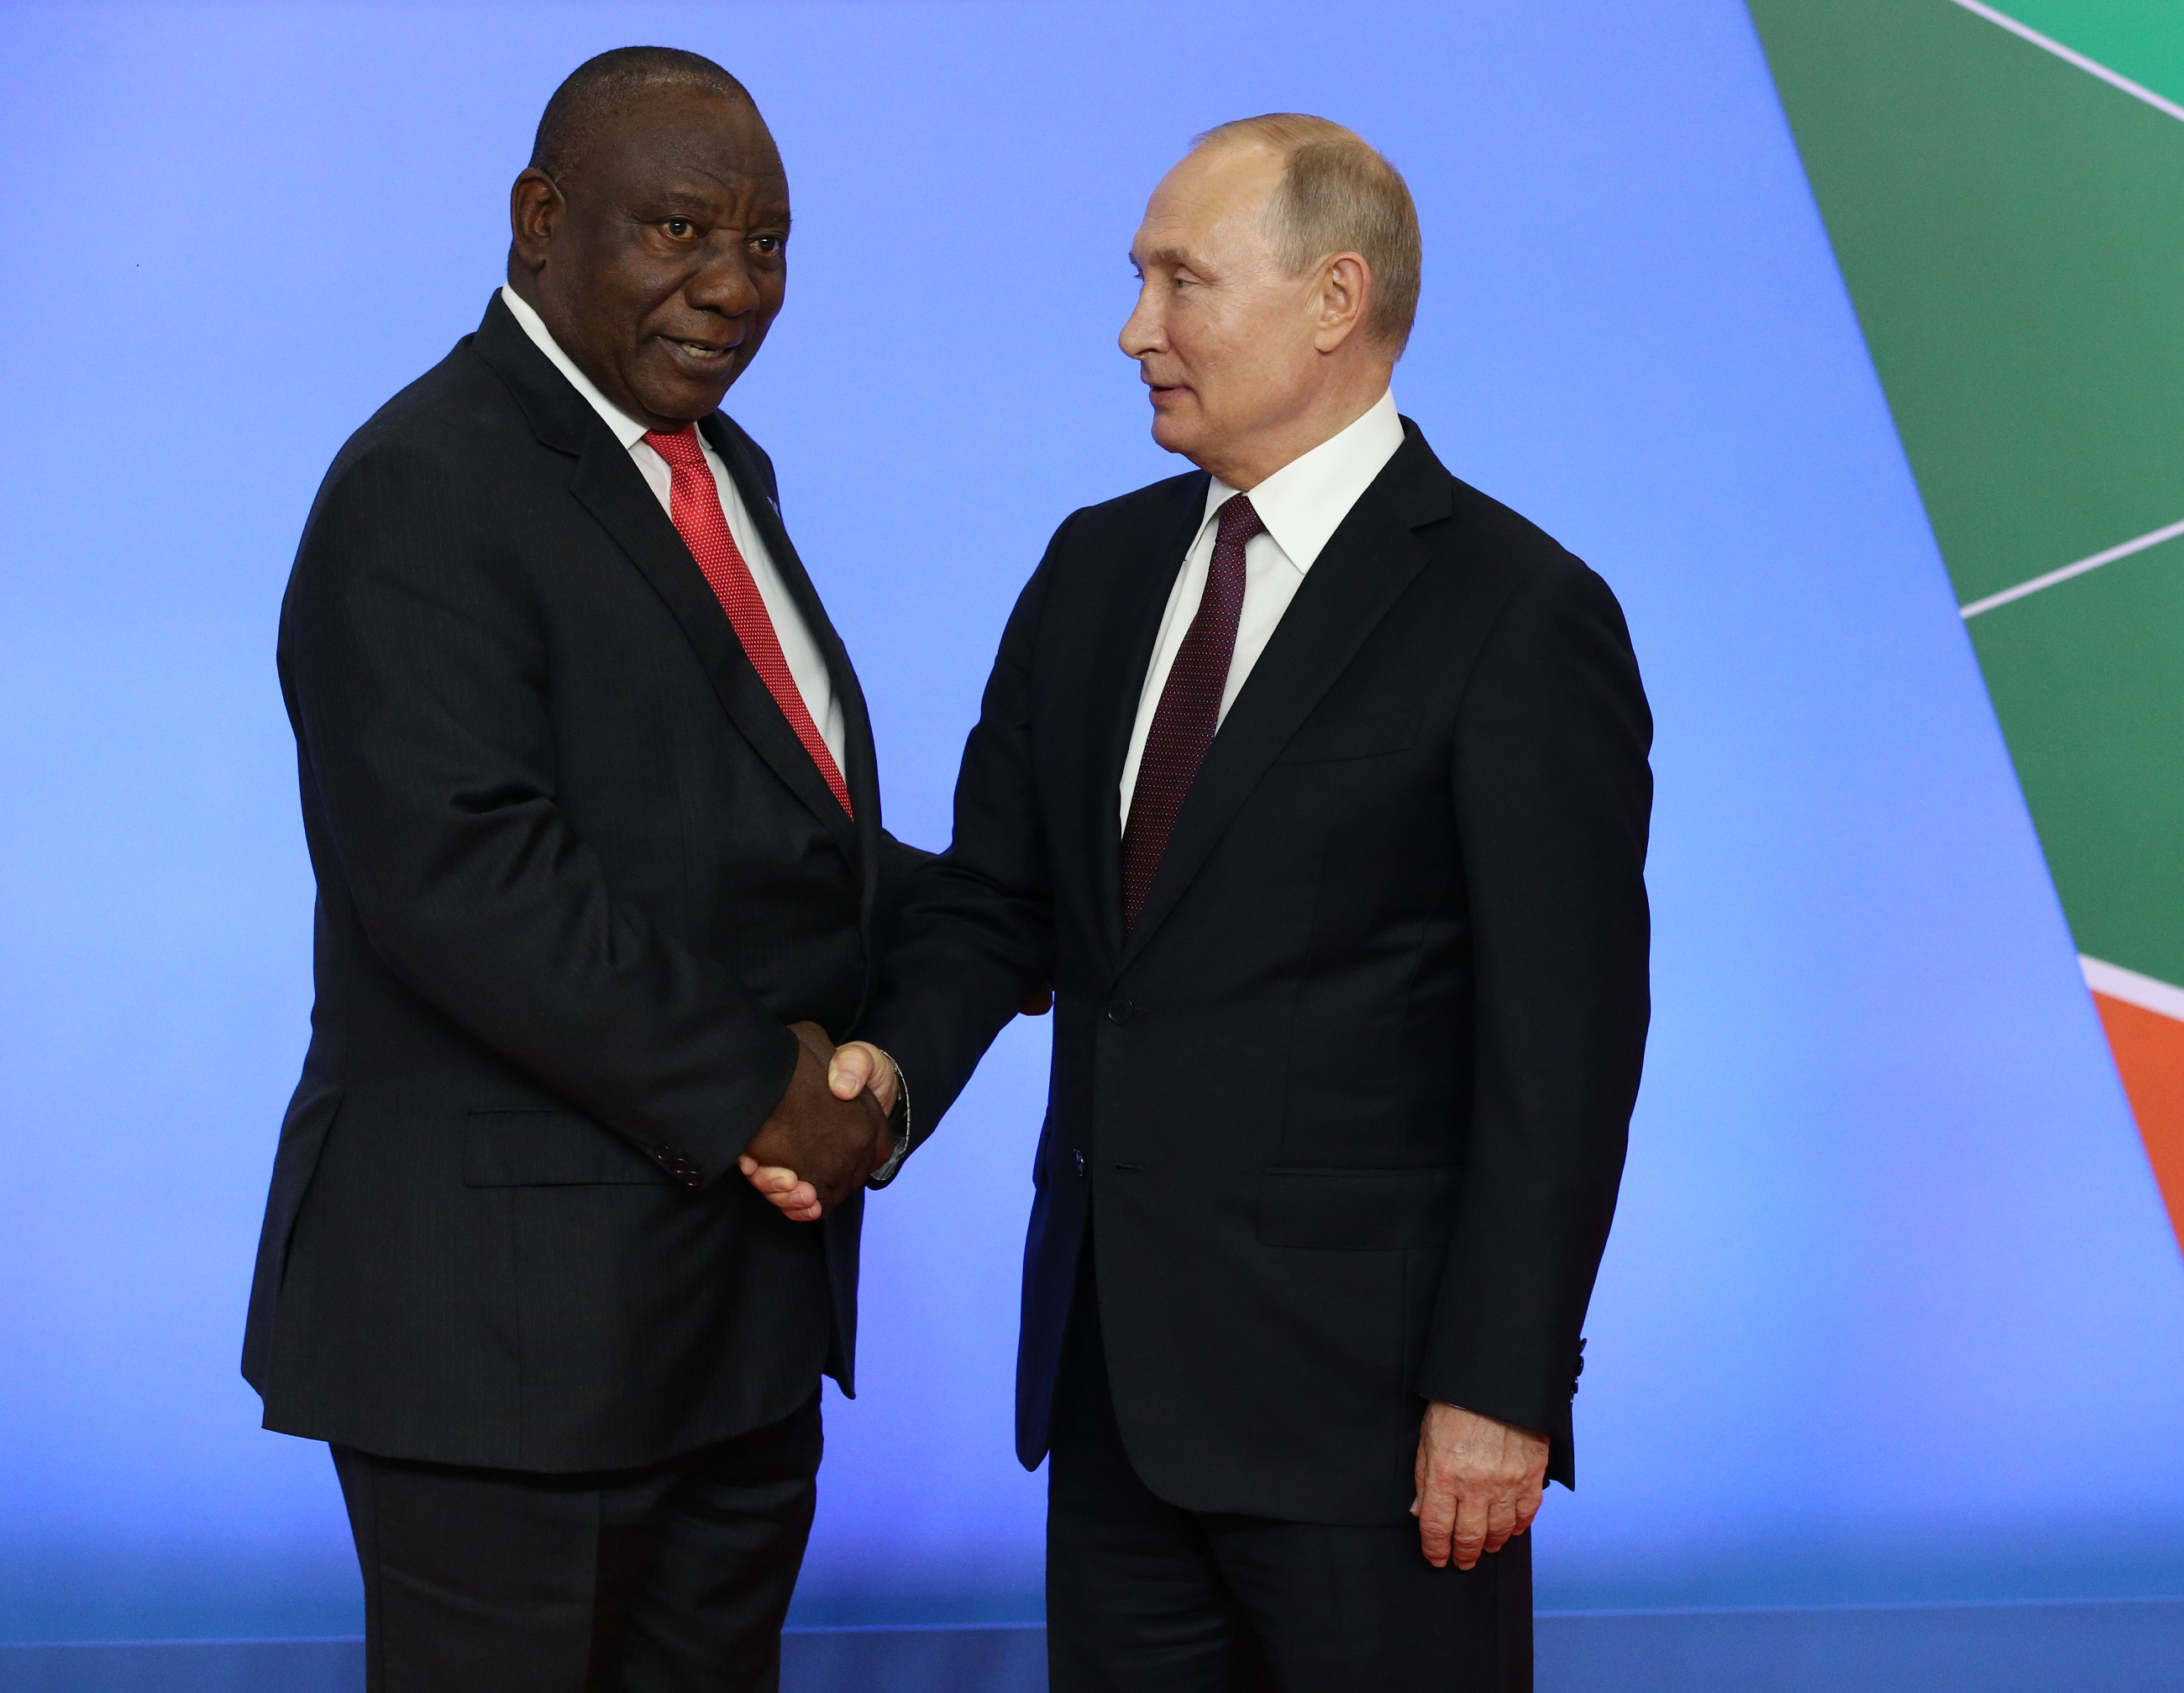 Russian President Vladimir Putin (R) greets South African President Cyril Ramaphosa (L) during the welcoming ceremony at the Russia-Africa Summit in Black Sea resort of Sochi, Russia, October 23, 2019.